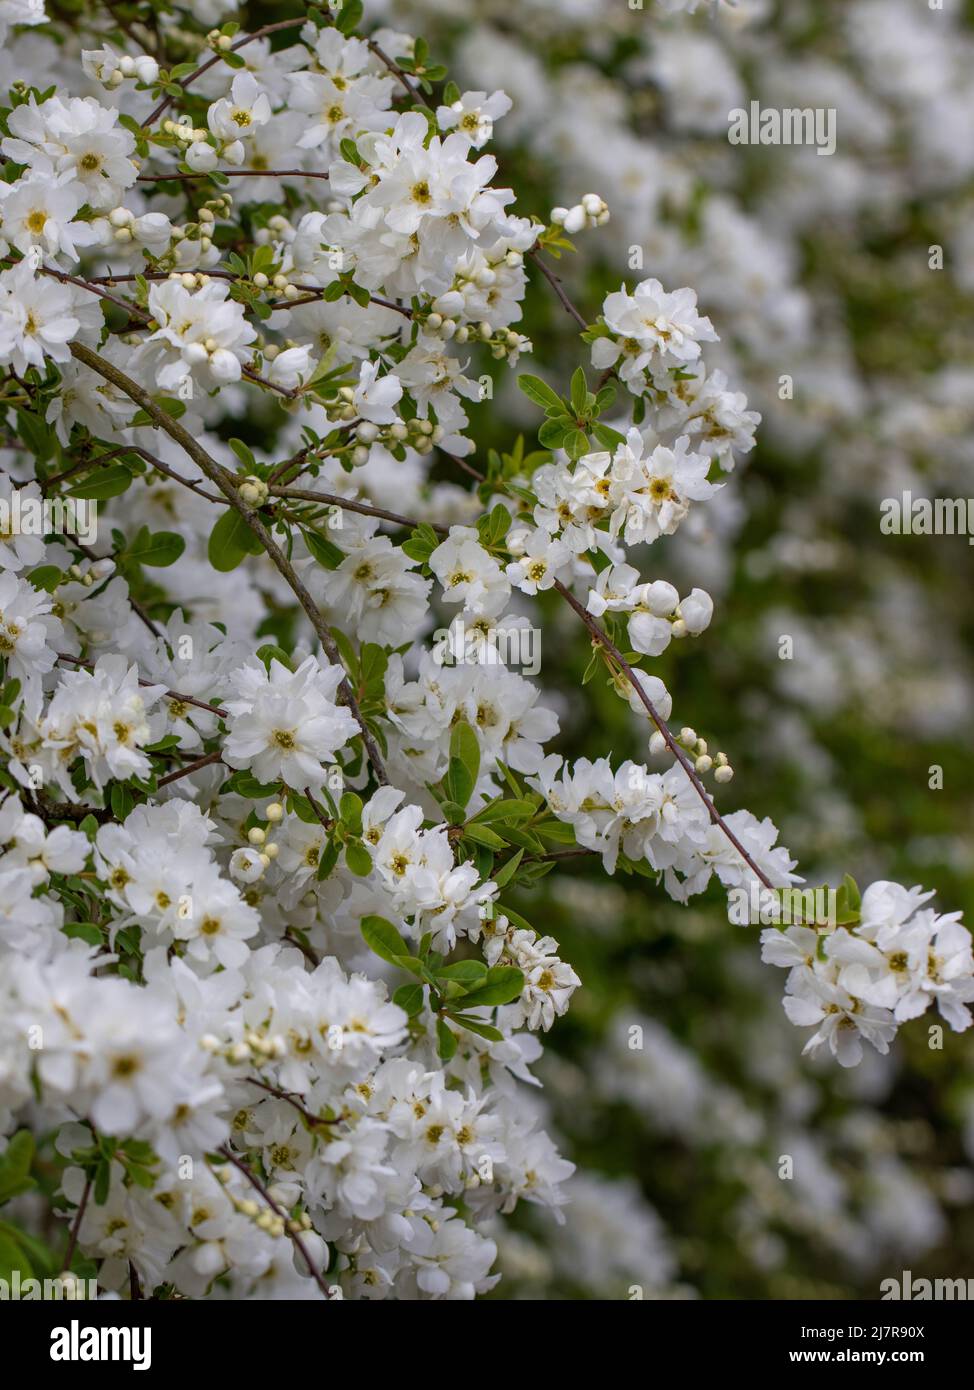 Cluster of hanging Exochorda macrantha The Bride flowers in spring Stock Photo